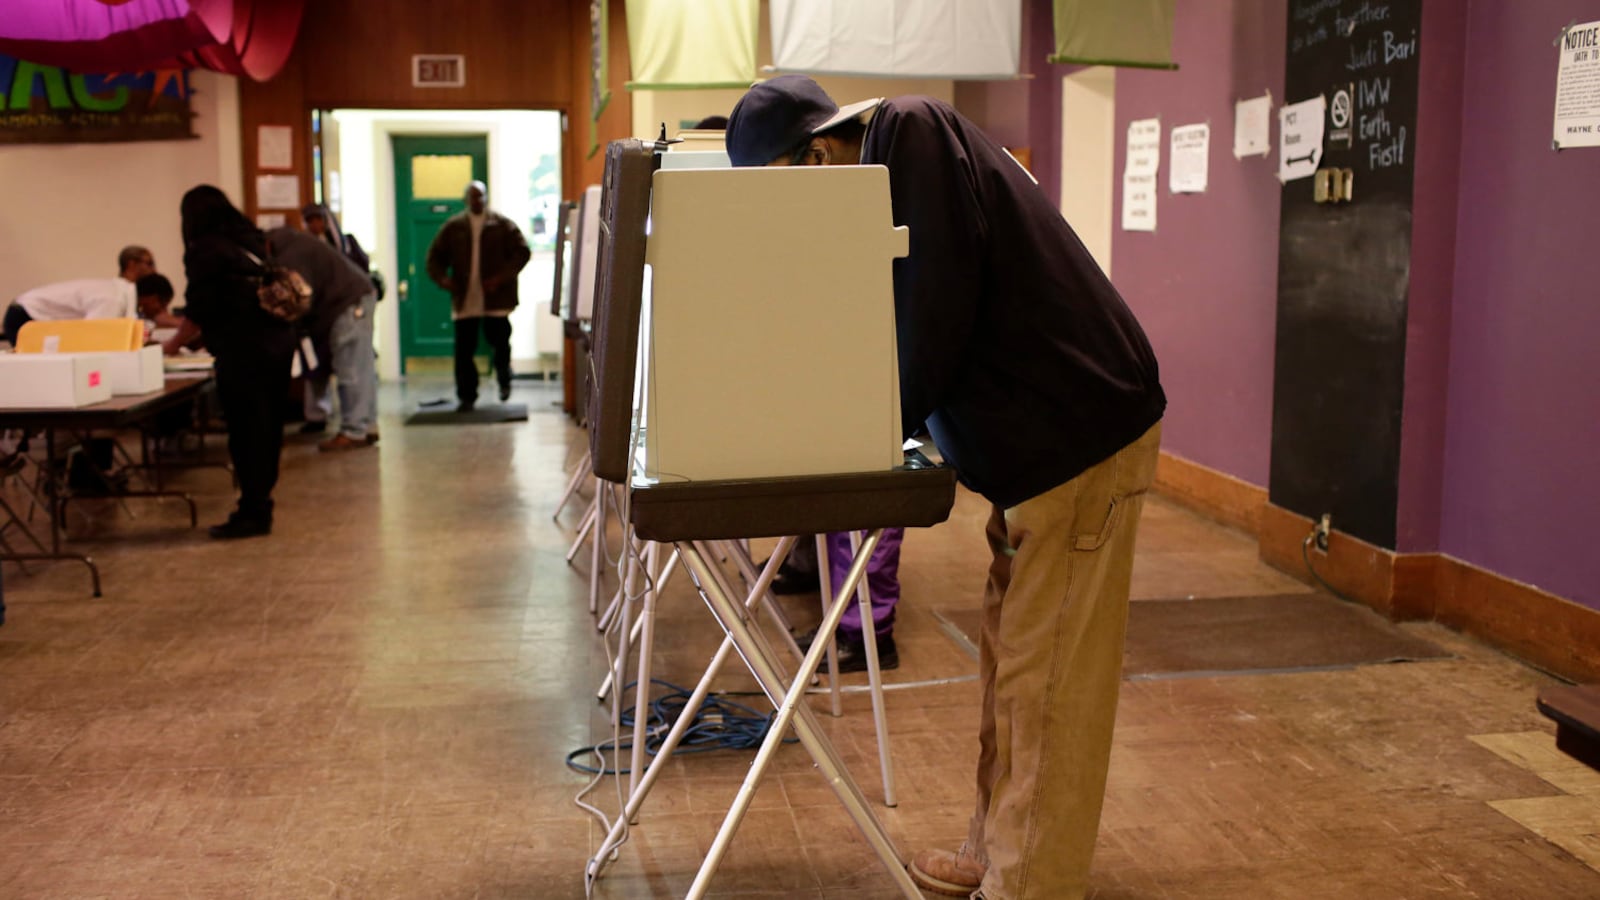 A man fills out his ballot at a polling station during the midterm elections Nov. 4, 2014 in Detroit.